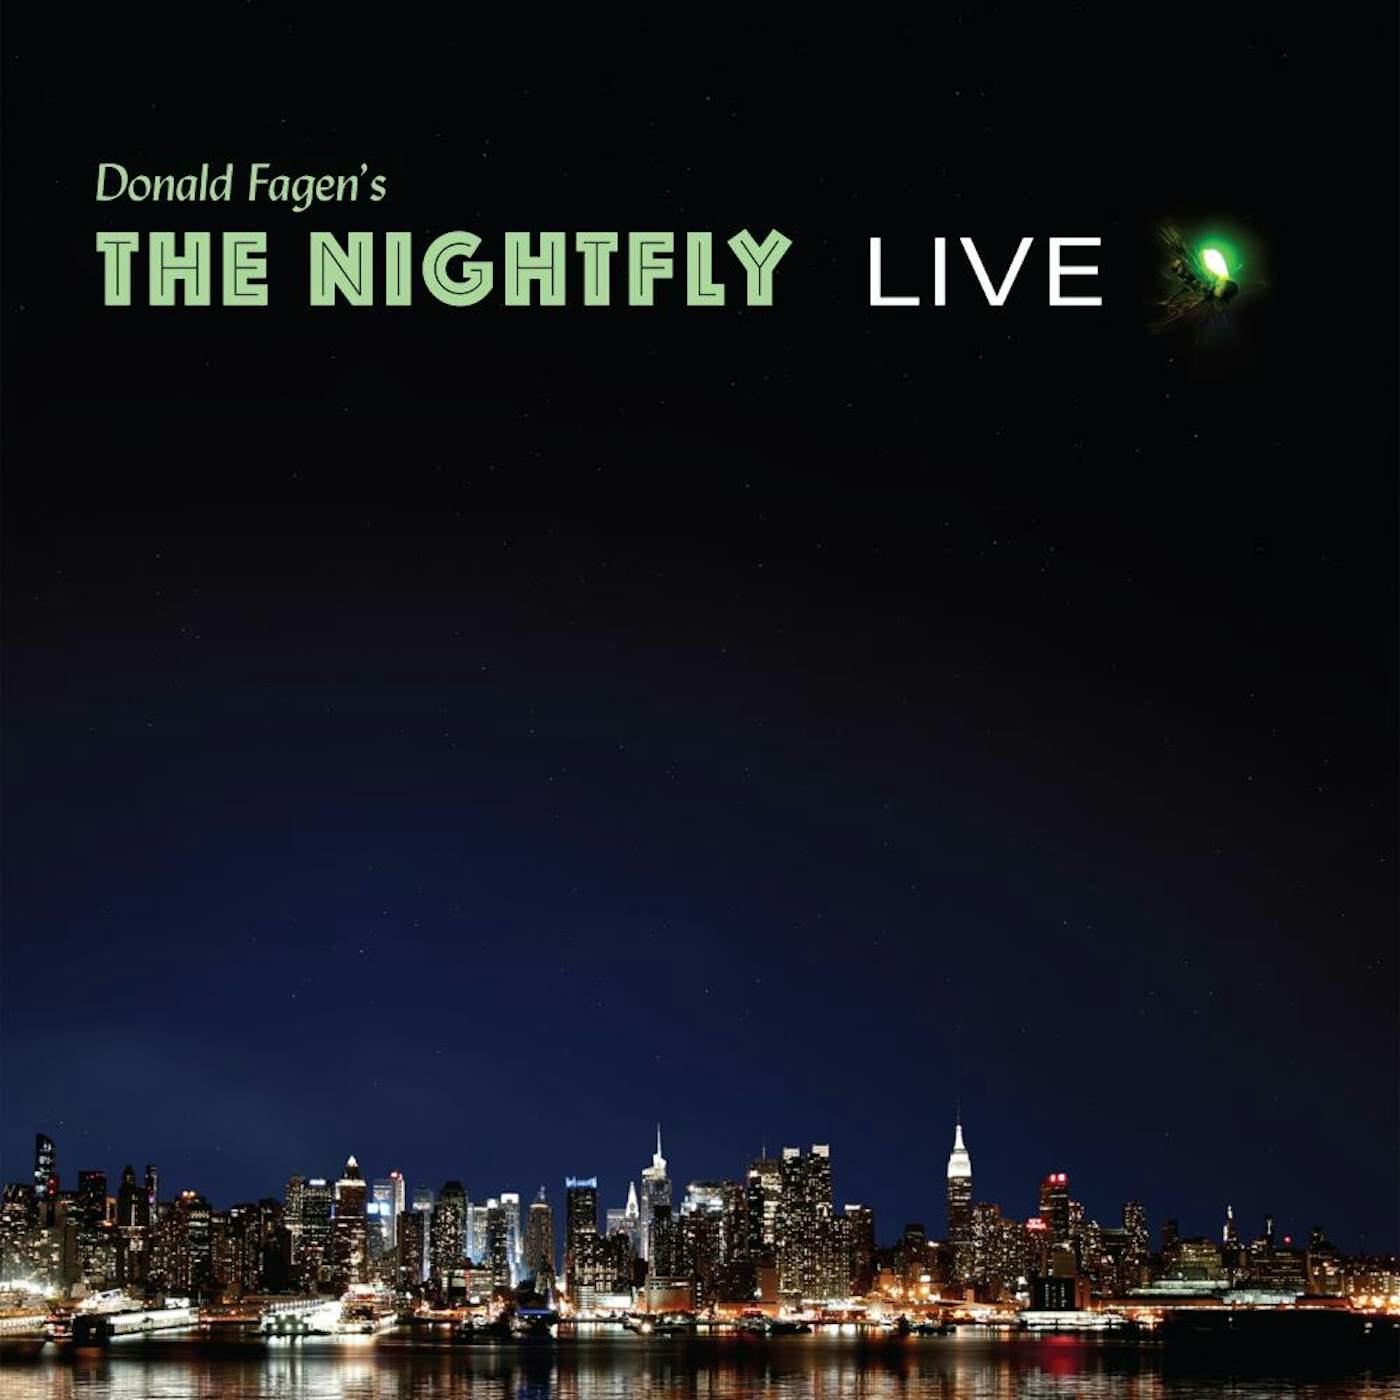 DONALD FAGEN'S THE NIGHTFLY LIVE CD